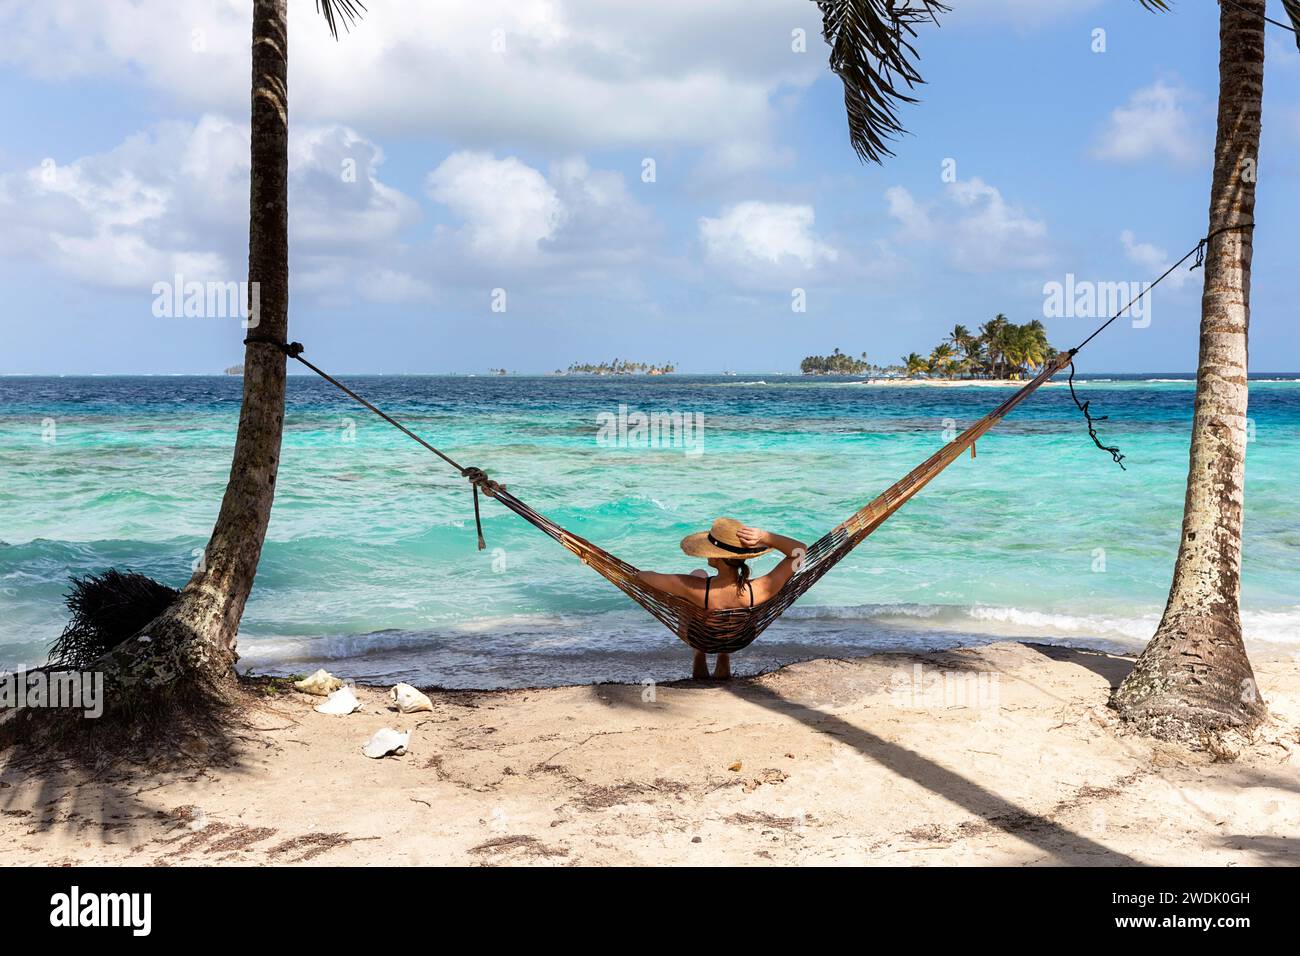 Woman tourist in a hammock with straw hat on her head relaxing on a idyllic tropical island in indigenous territory of Guna Yala in Panama Stock Photo